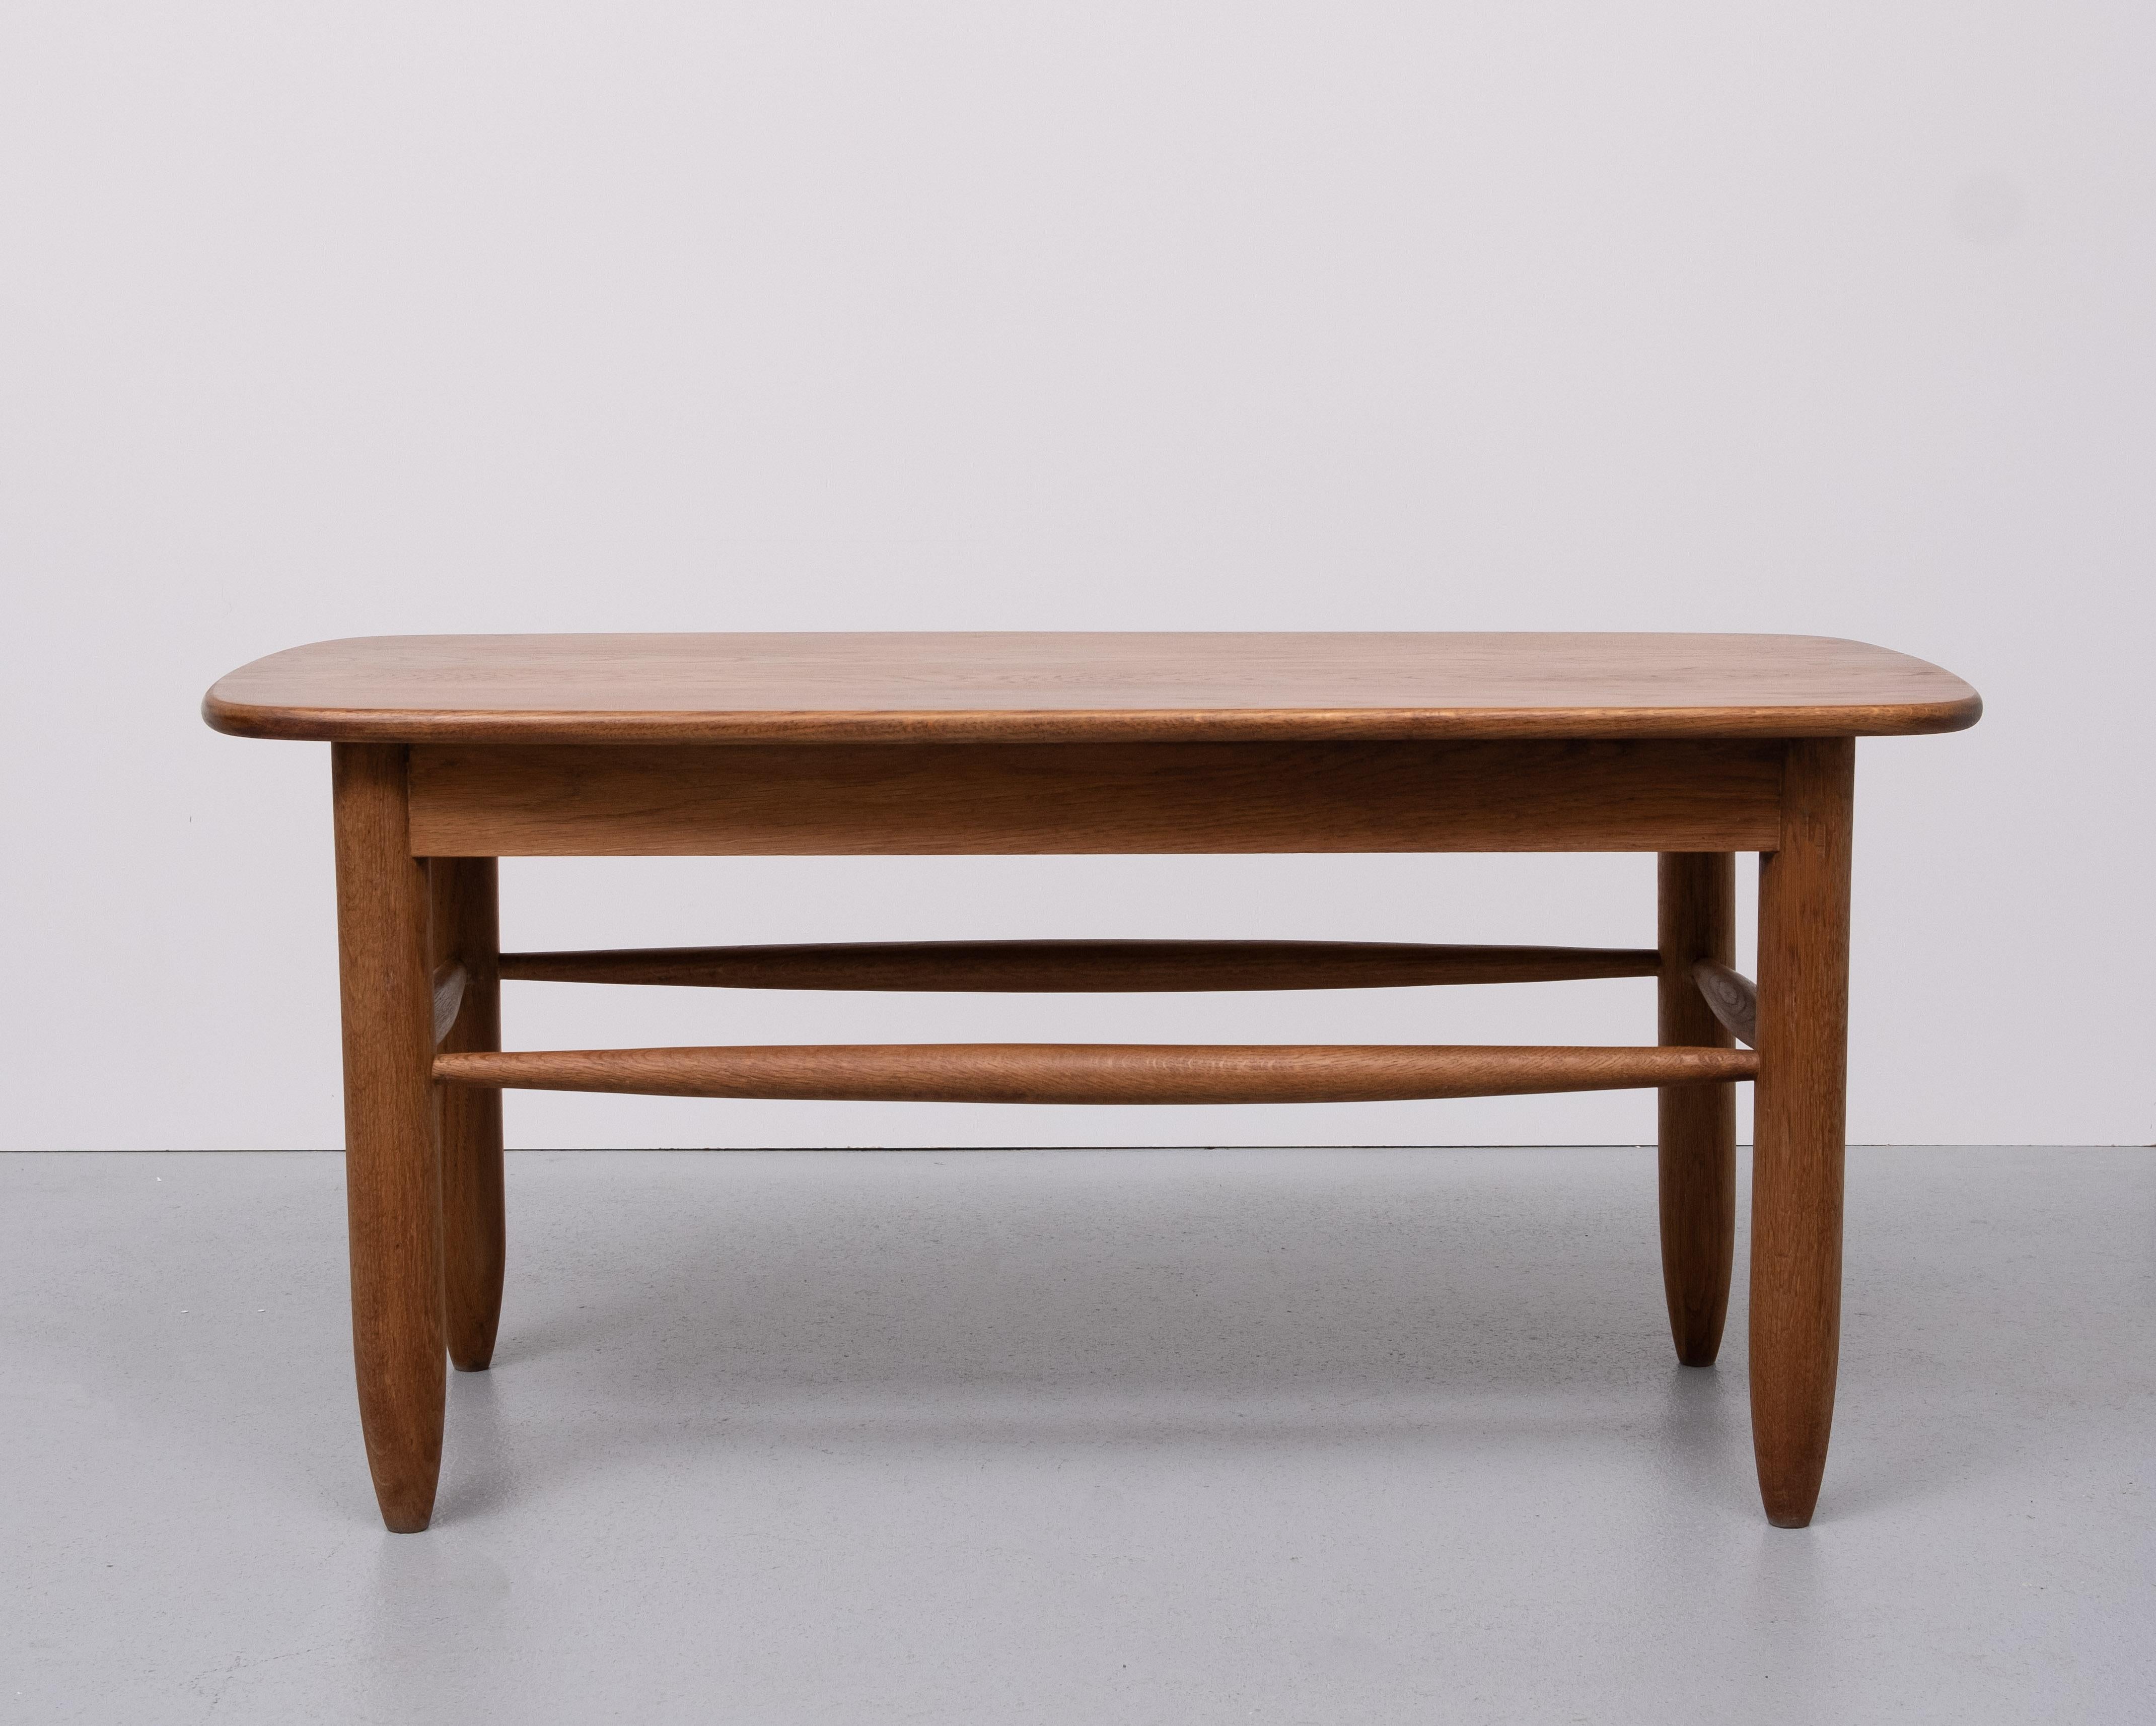 Very nice solid Oak coffee table, looks like the tables of Charlotte Periand